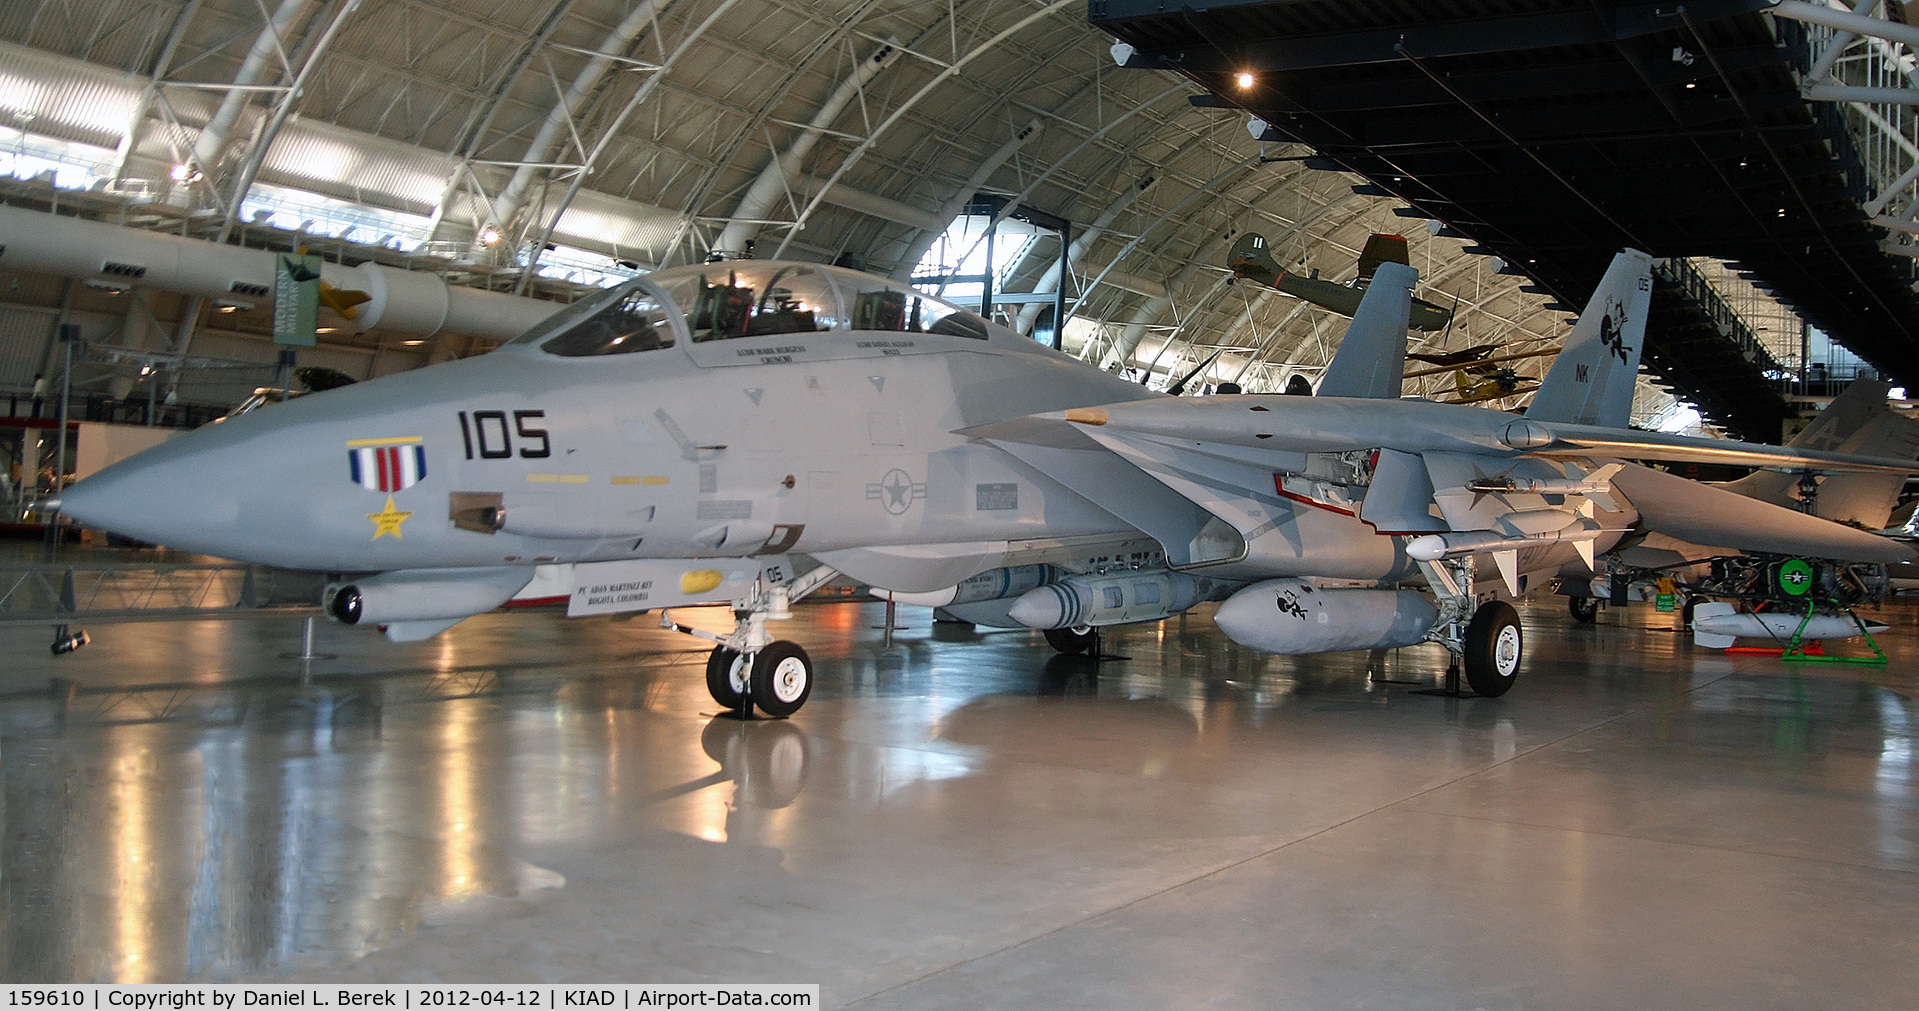 159610, Grumman F-14D(R) Tomcat C/N 157, Originally built as an F-14A, this aircraft was one of the few to be converted to a D model.  She is credited with a MiG kill off the coast of Libya.